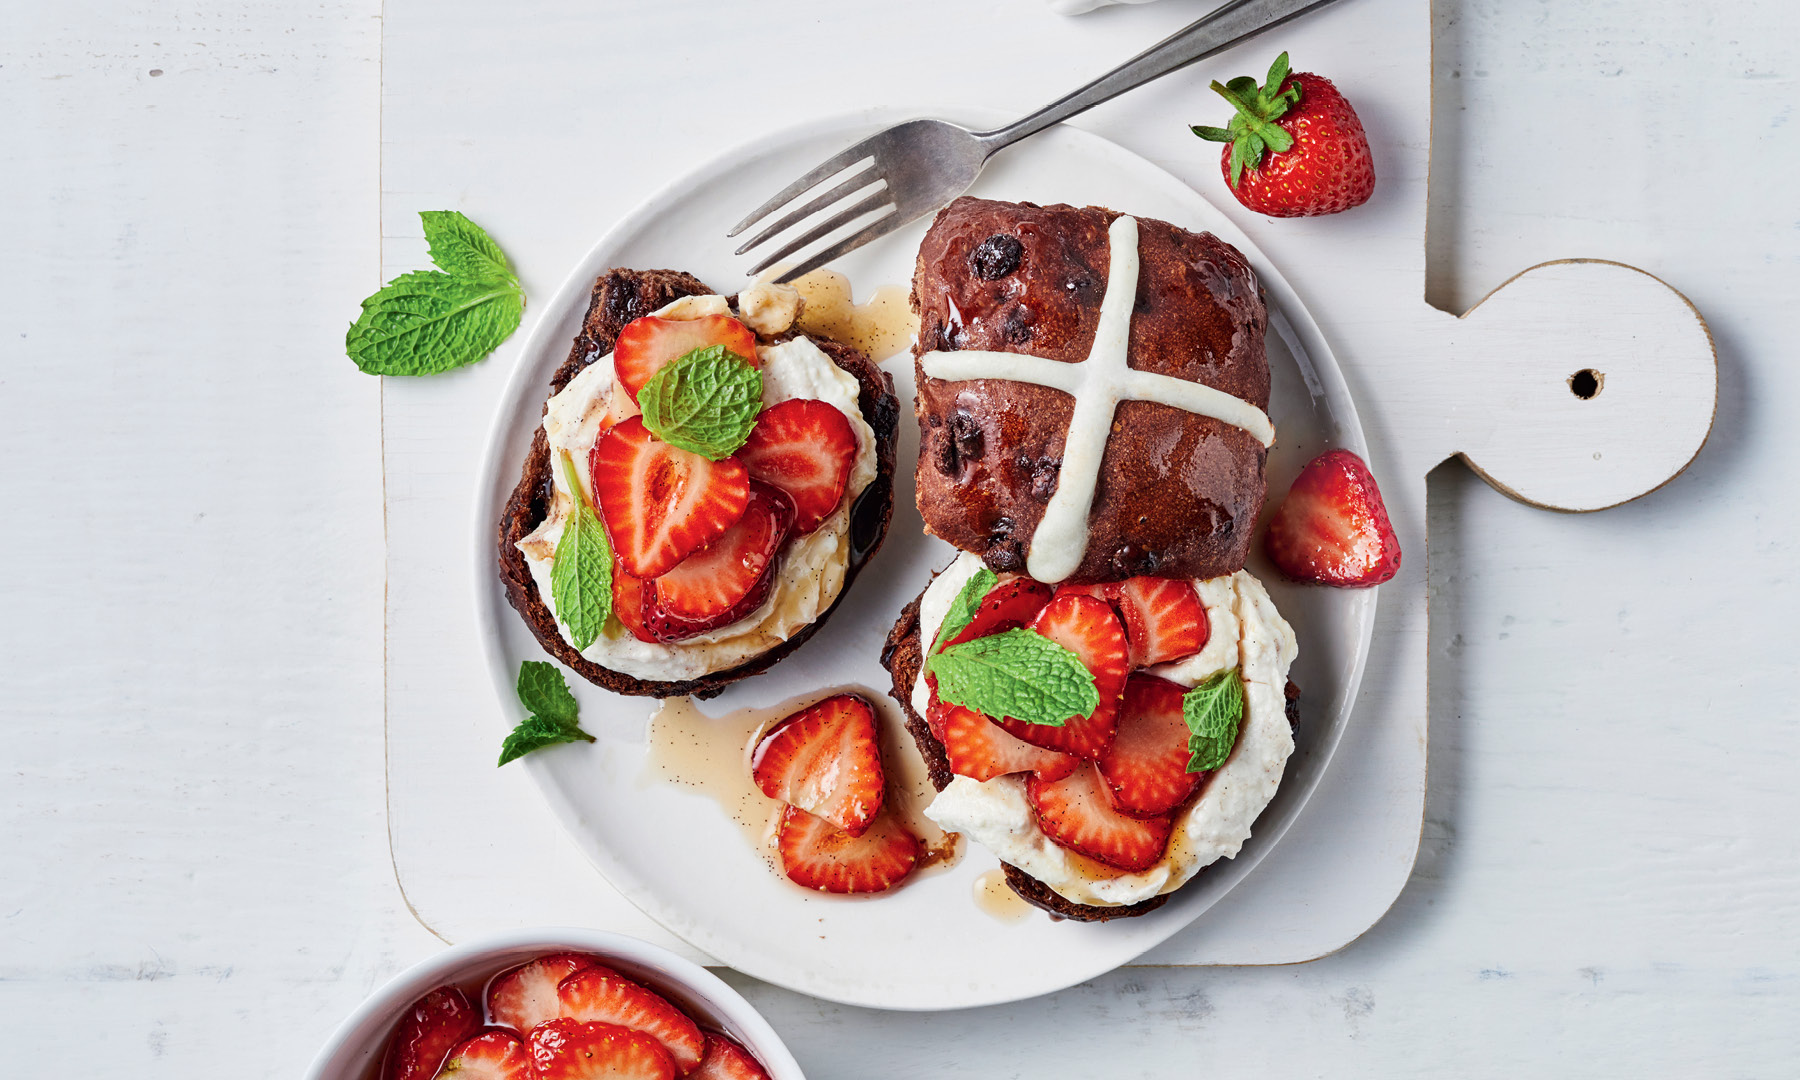 Hot cross buns with strawberries